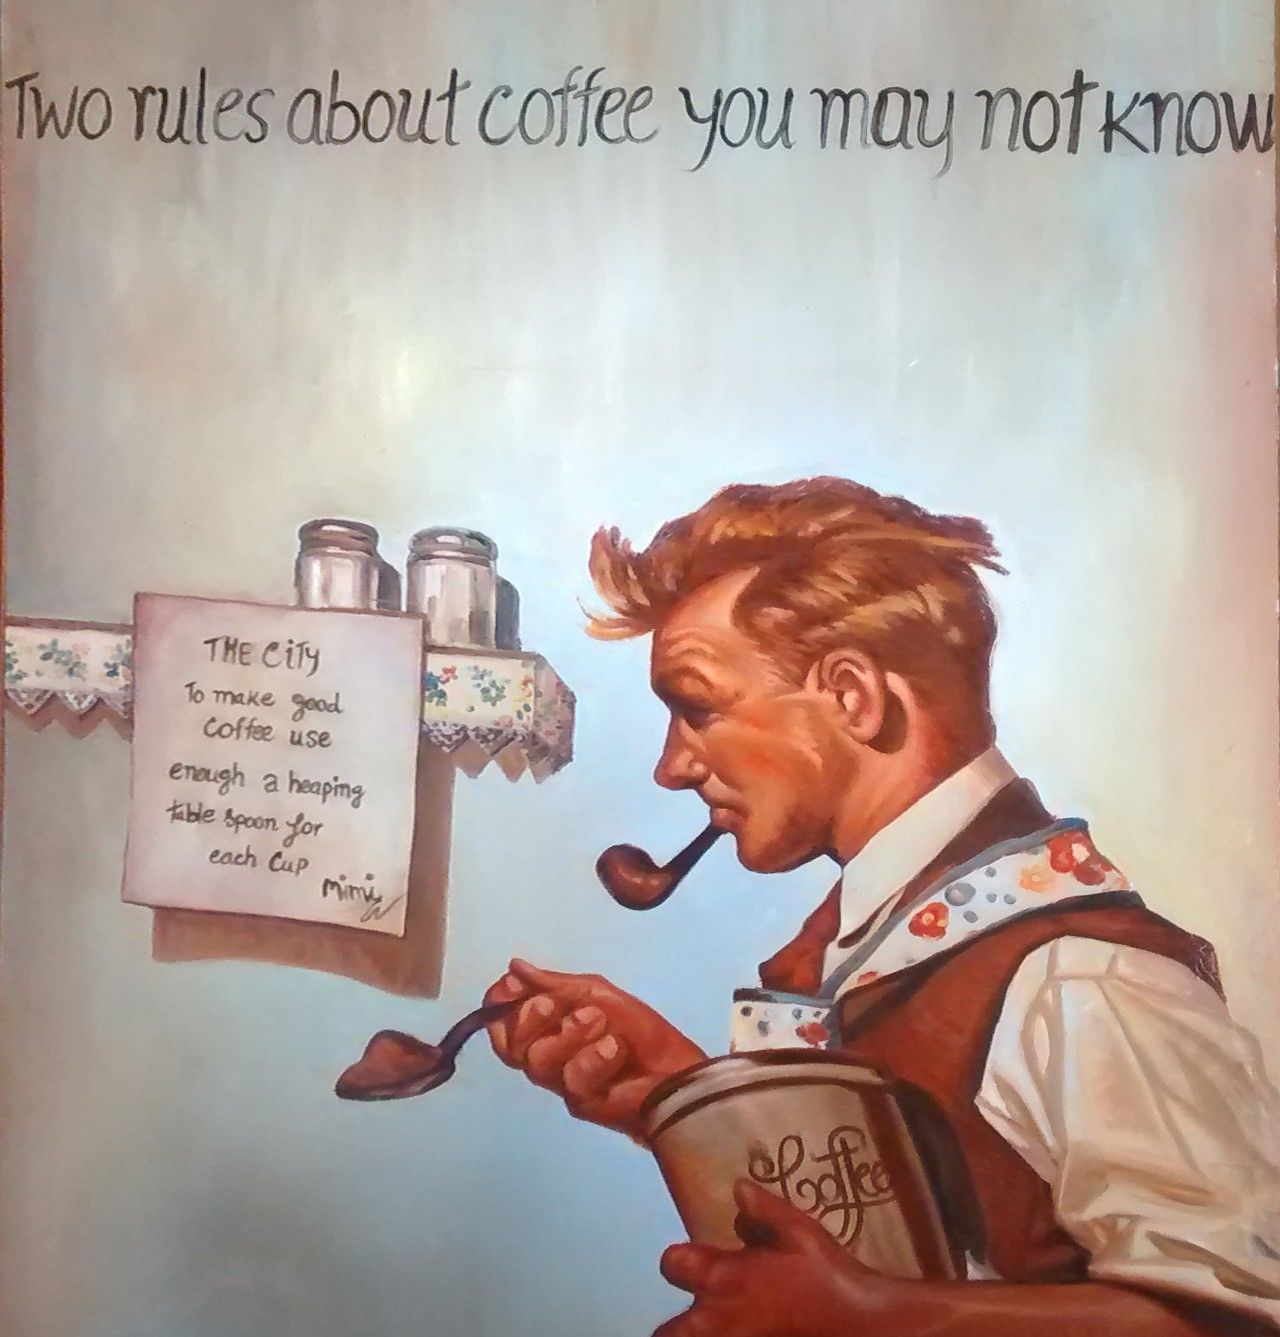 Two rules about coffee you may not know